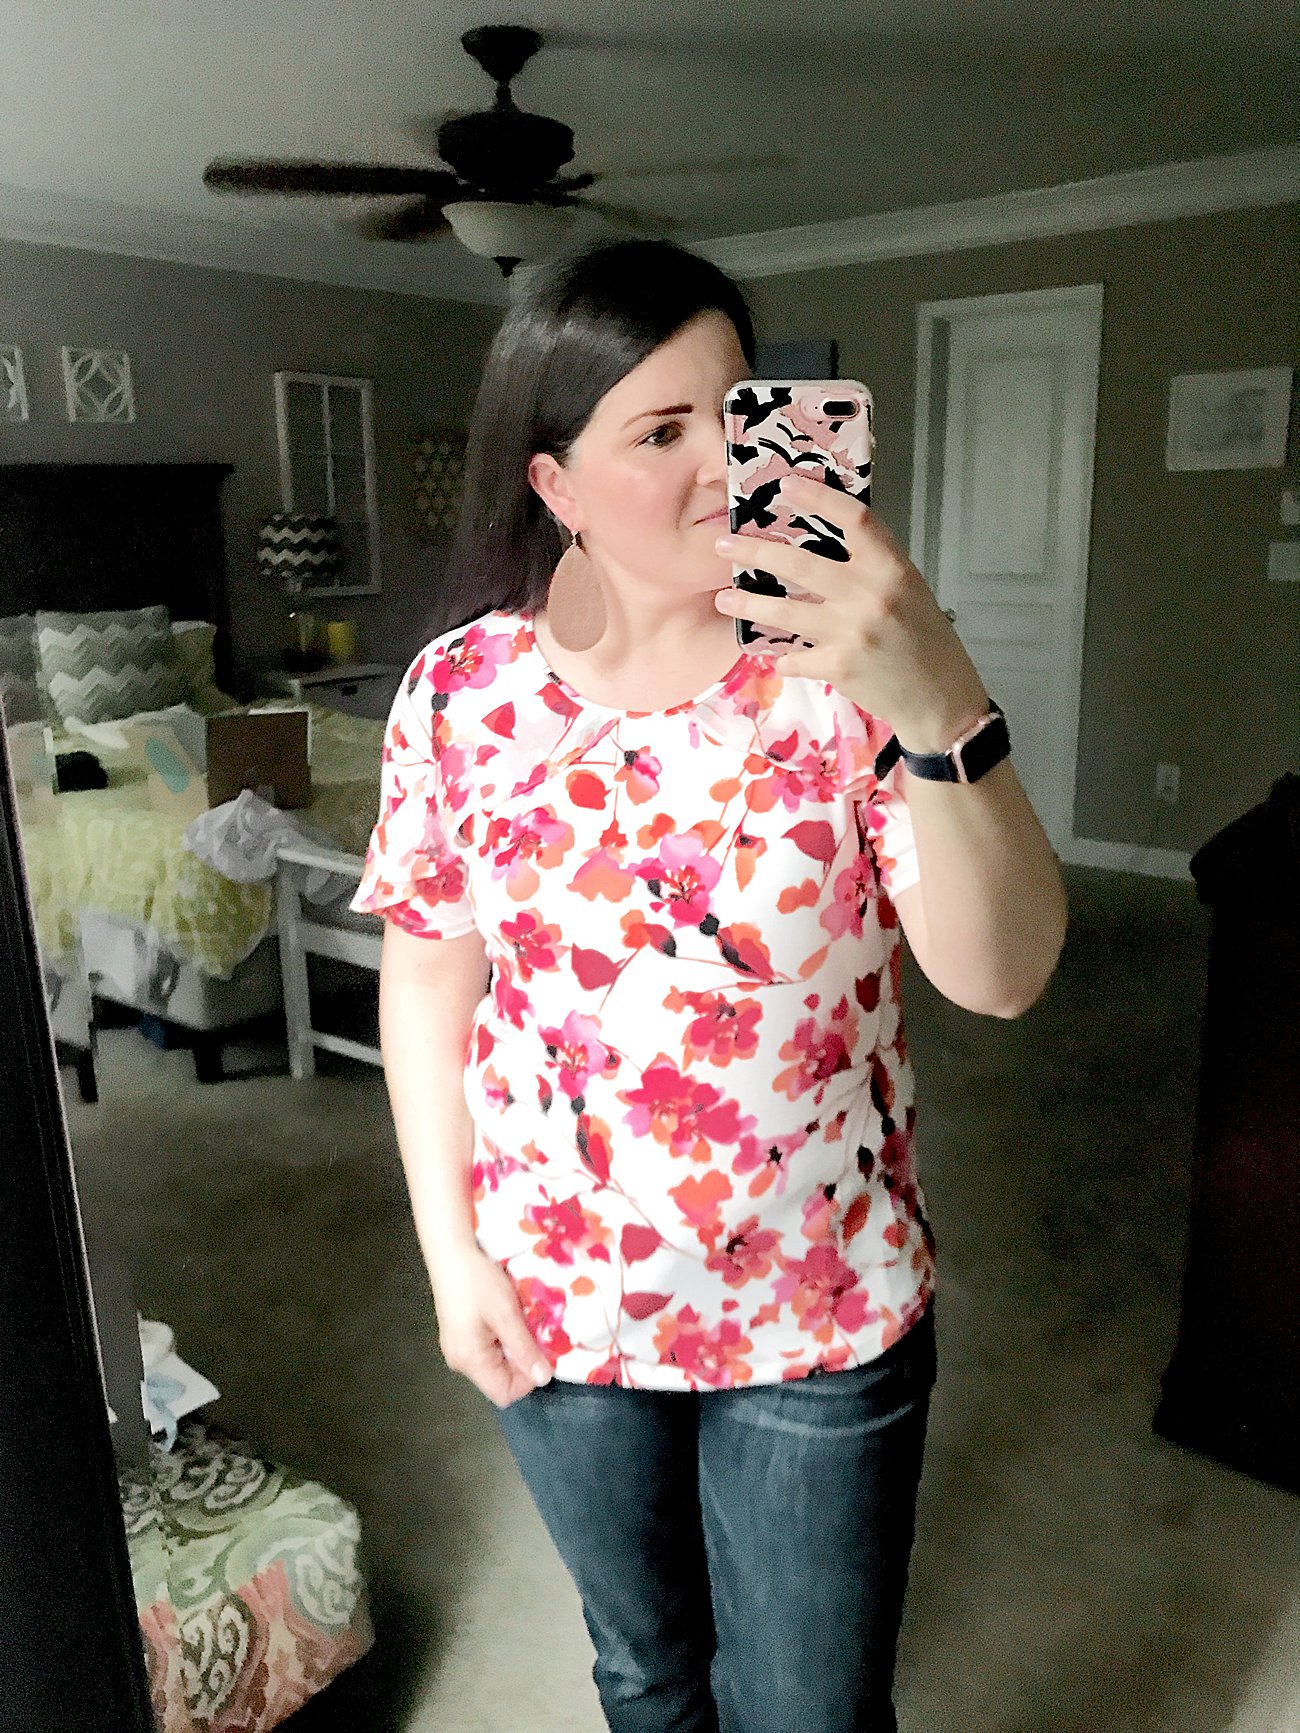 CALVIN KLEIN Cayzea Chiffon Ruffle Knit Top - SIZE: L - $54 - Stitch Fix Review #46 by popular North Carolina ethical fashion blogger Still Being Molly